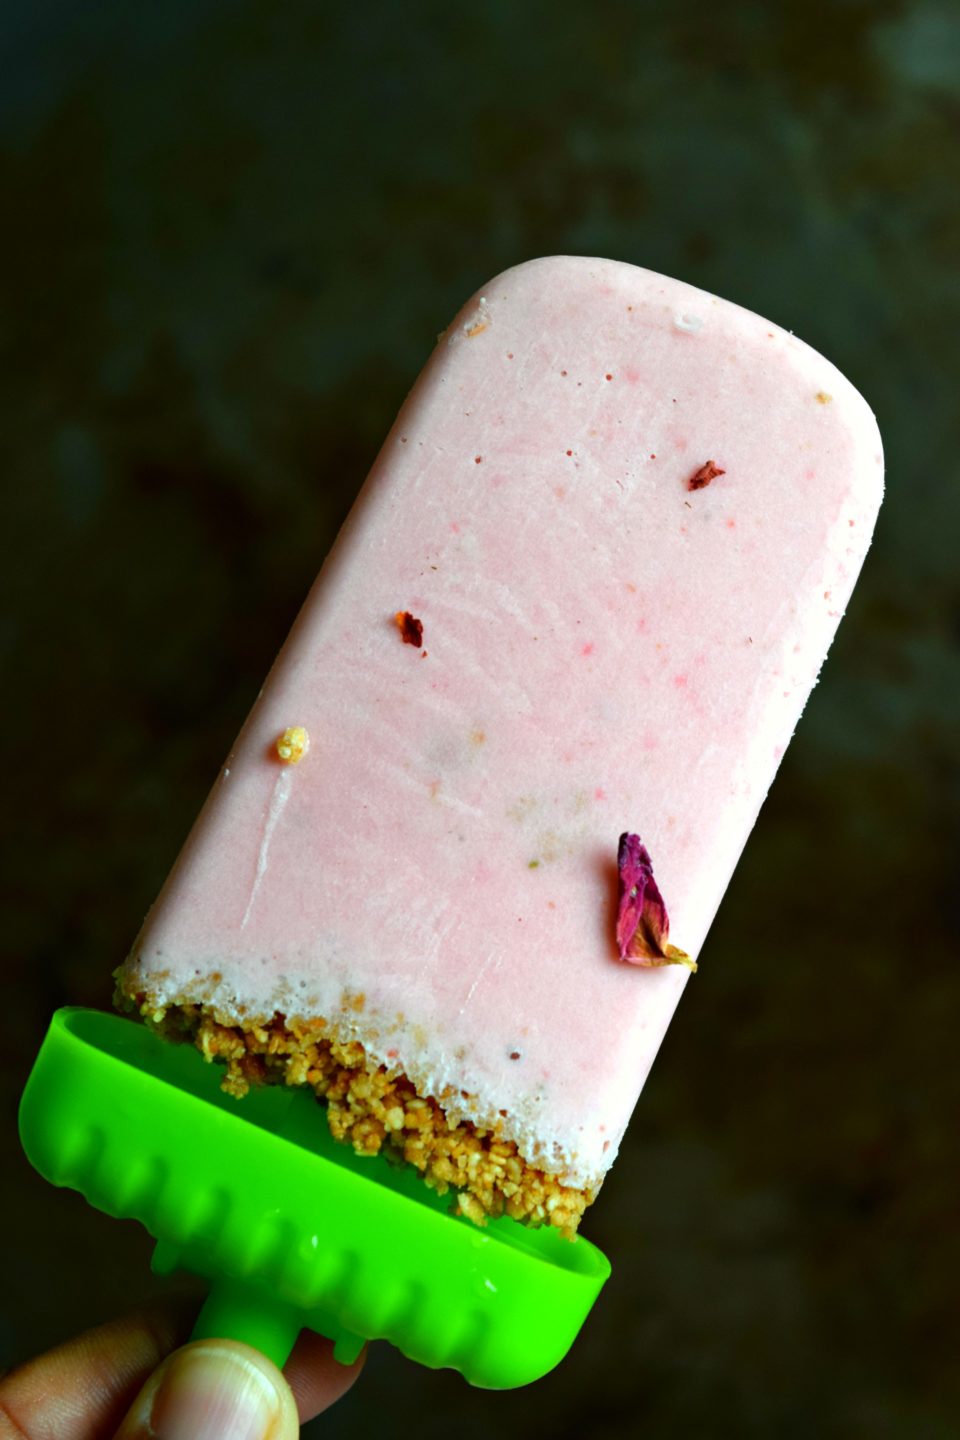 It's a creamy strawberry cheesecake made into a Popsicle with crushed granola base. They taste just like biting into a real cheesecake minus the calories.